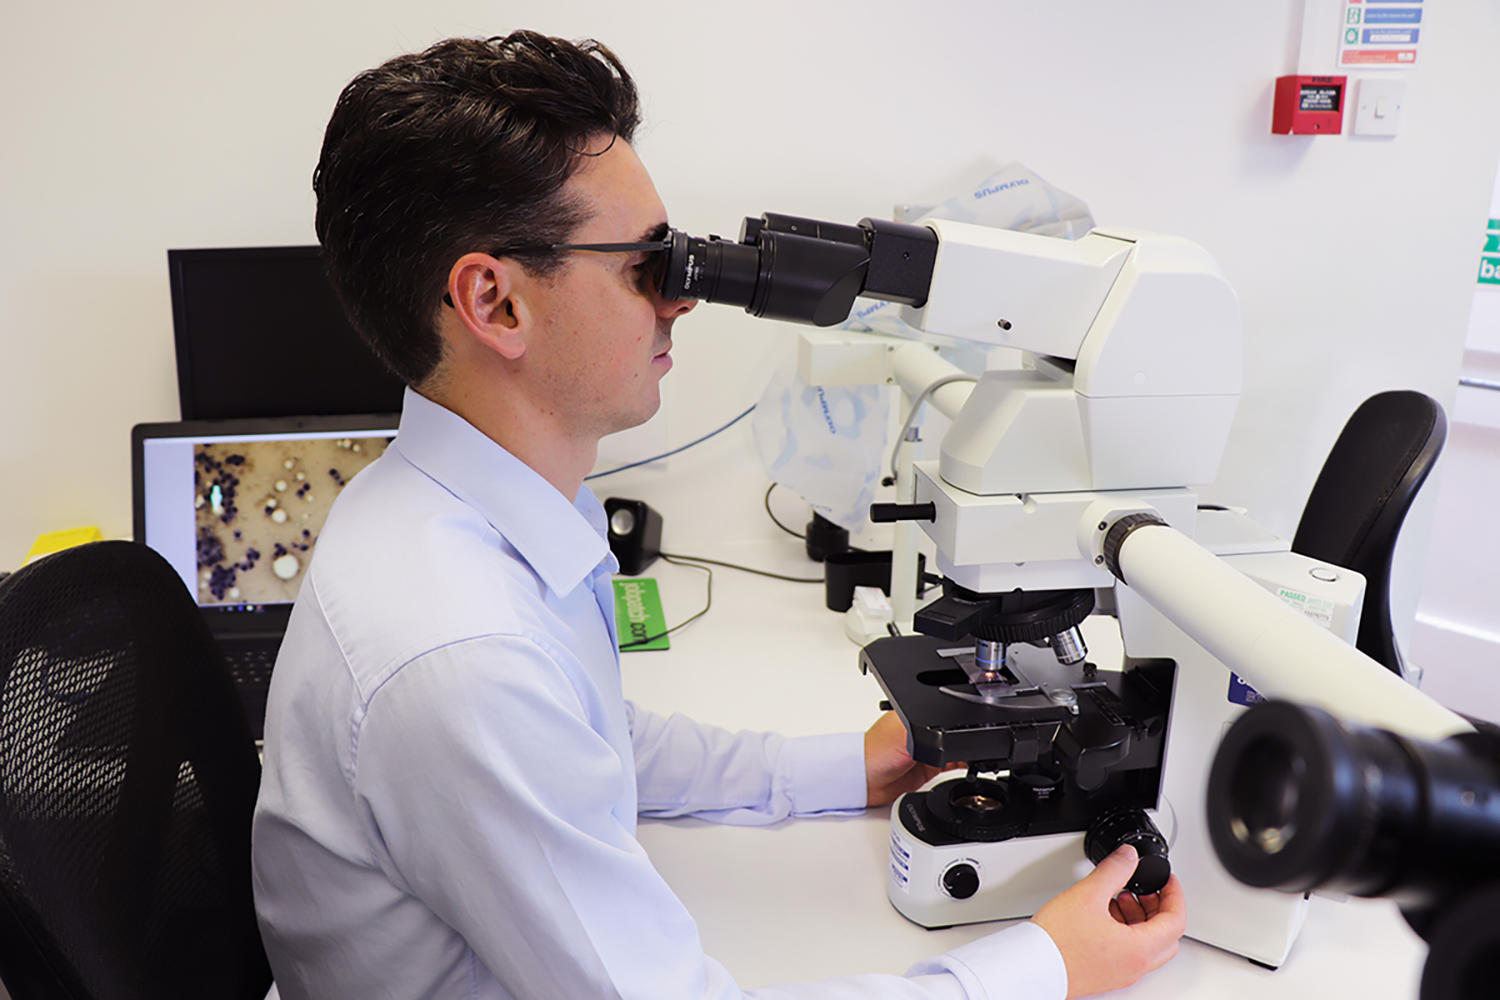 Alex Civello uses his microscope to diagnose issues such as iridociliary adenoma, a benign tumour like the one found in Crumble’s eye